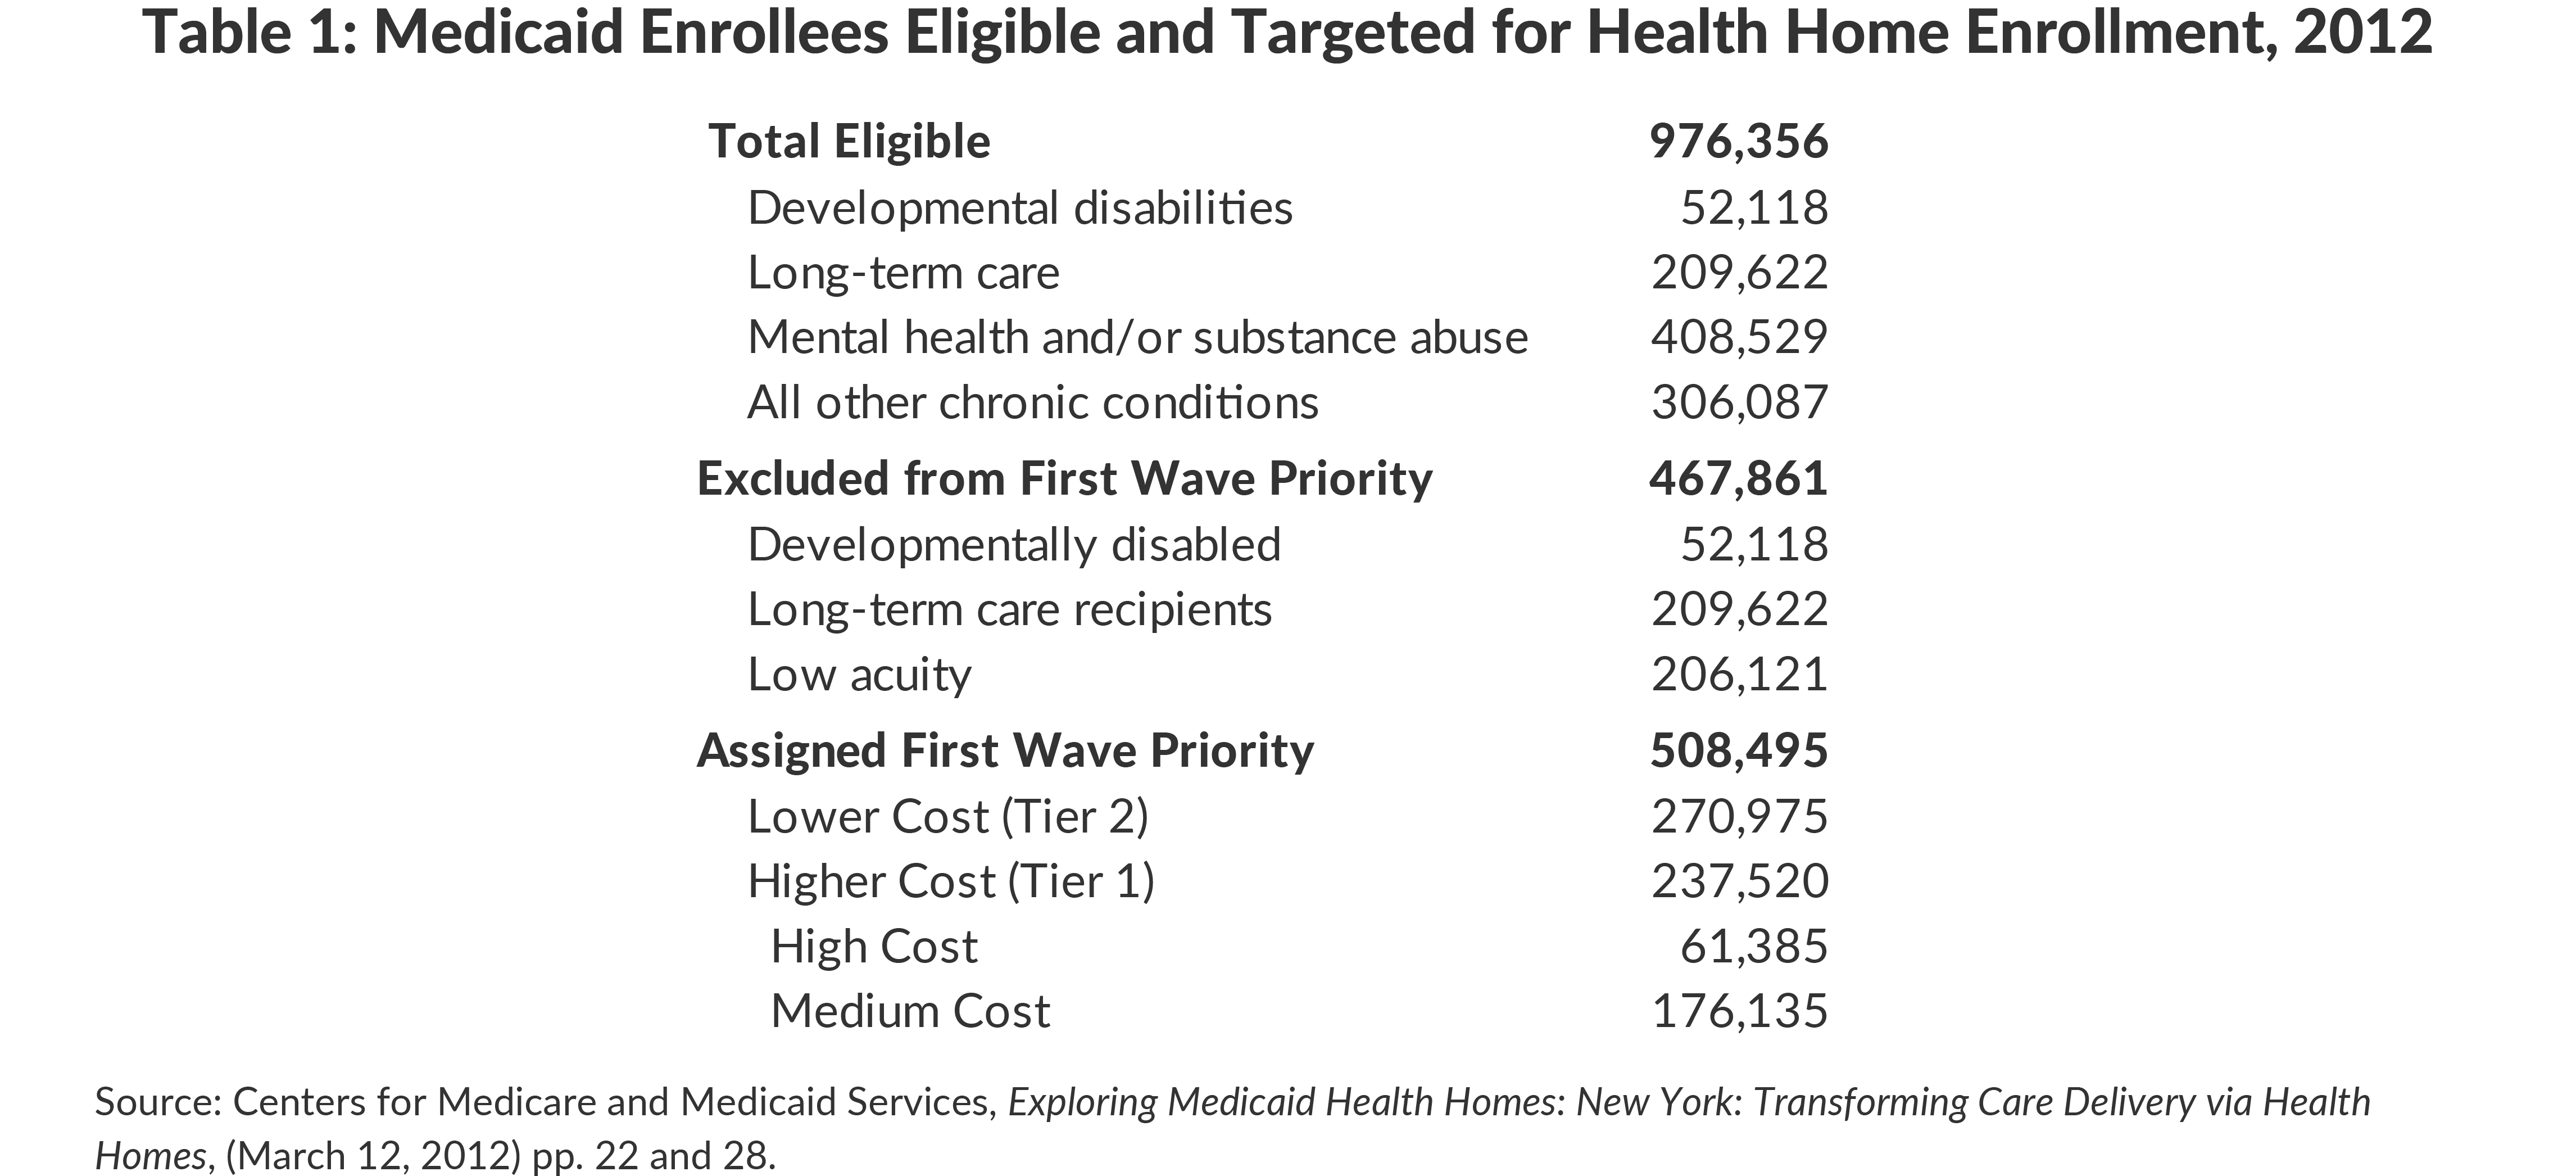 Table 1: Medicaid Enrollees Eligible and Targeted for Health Home Enrollment, 2012